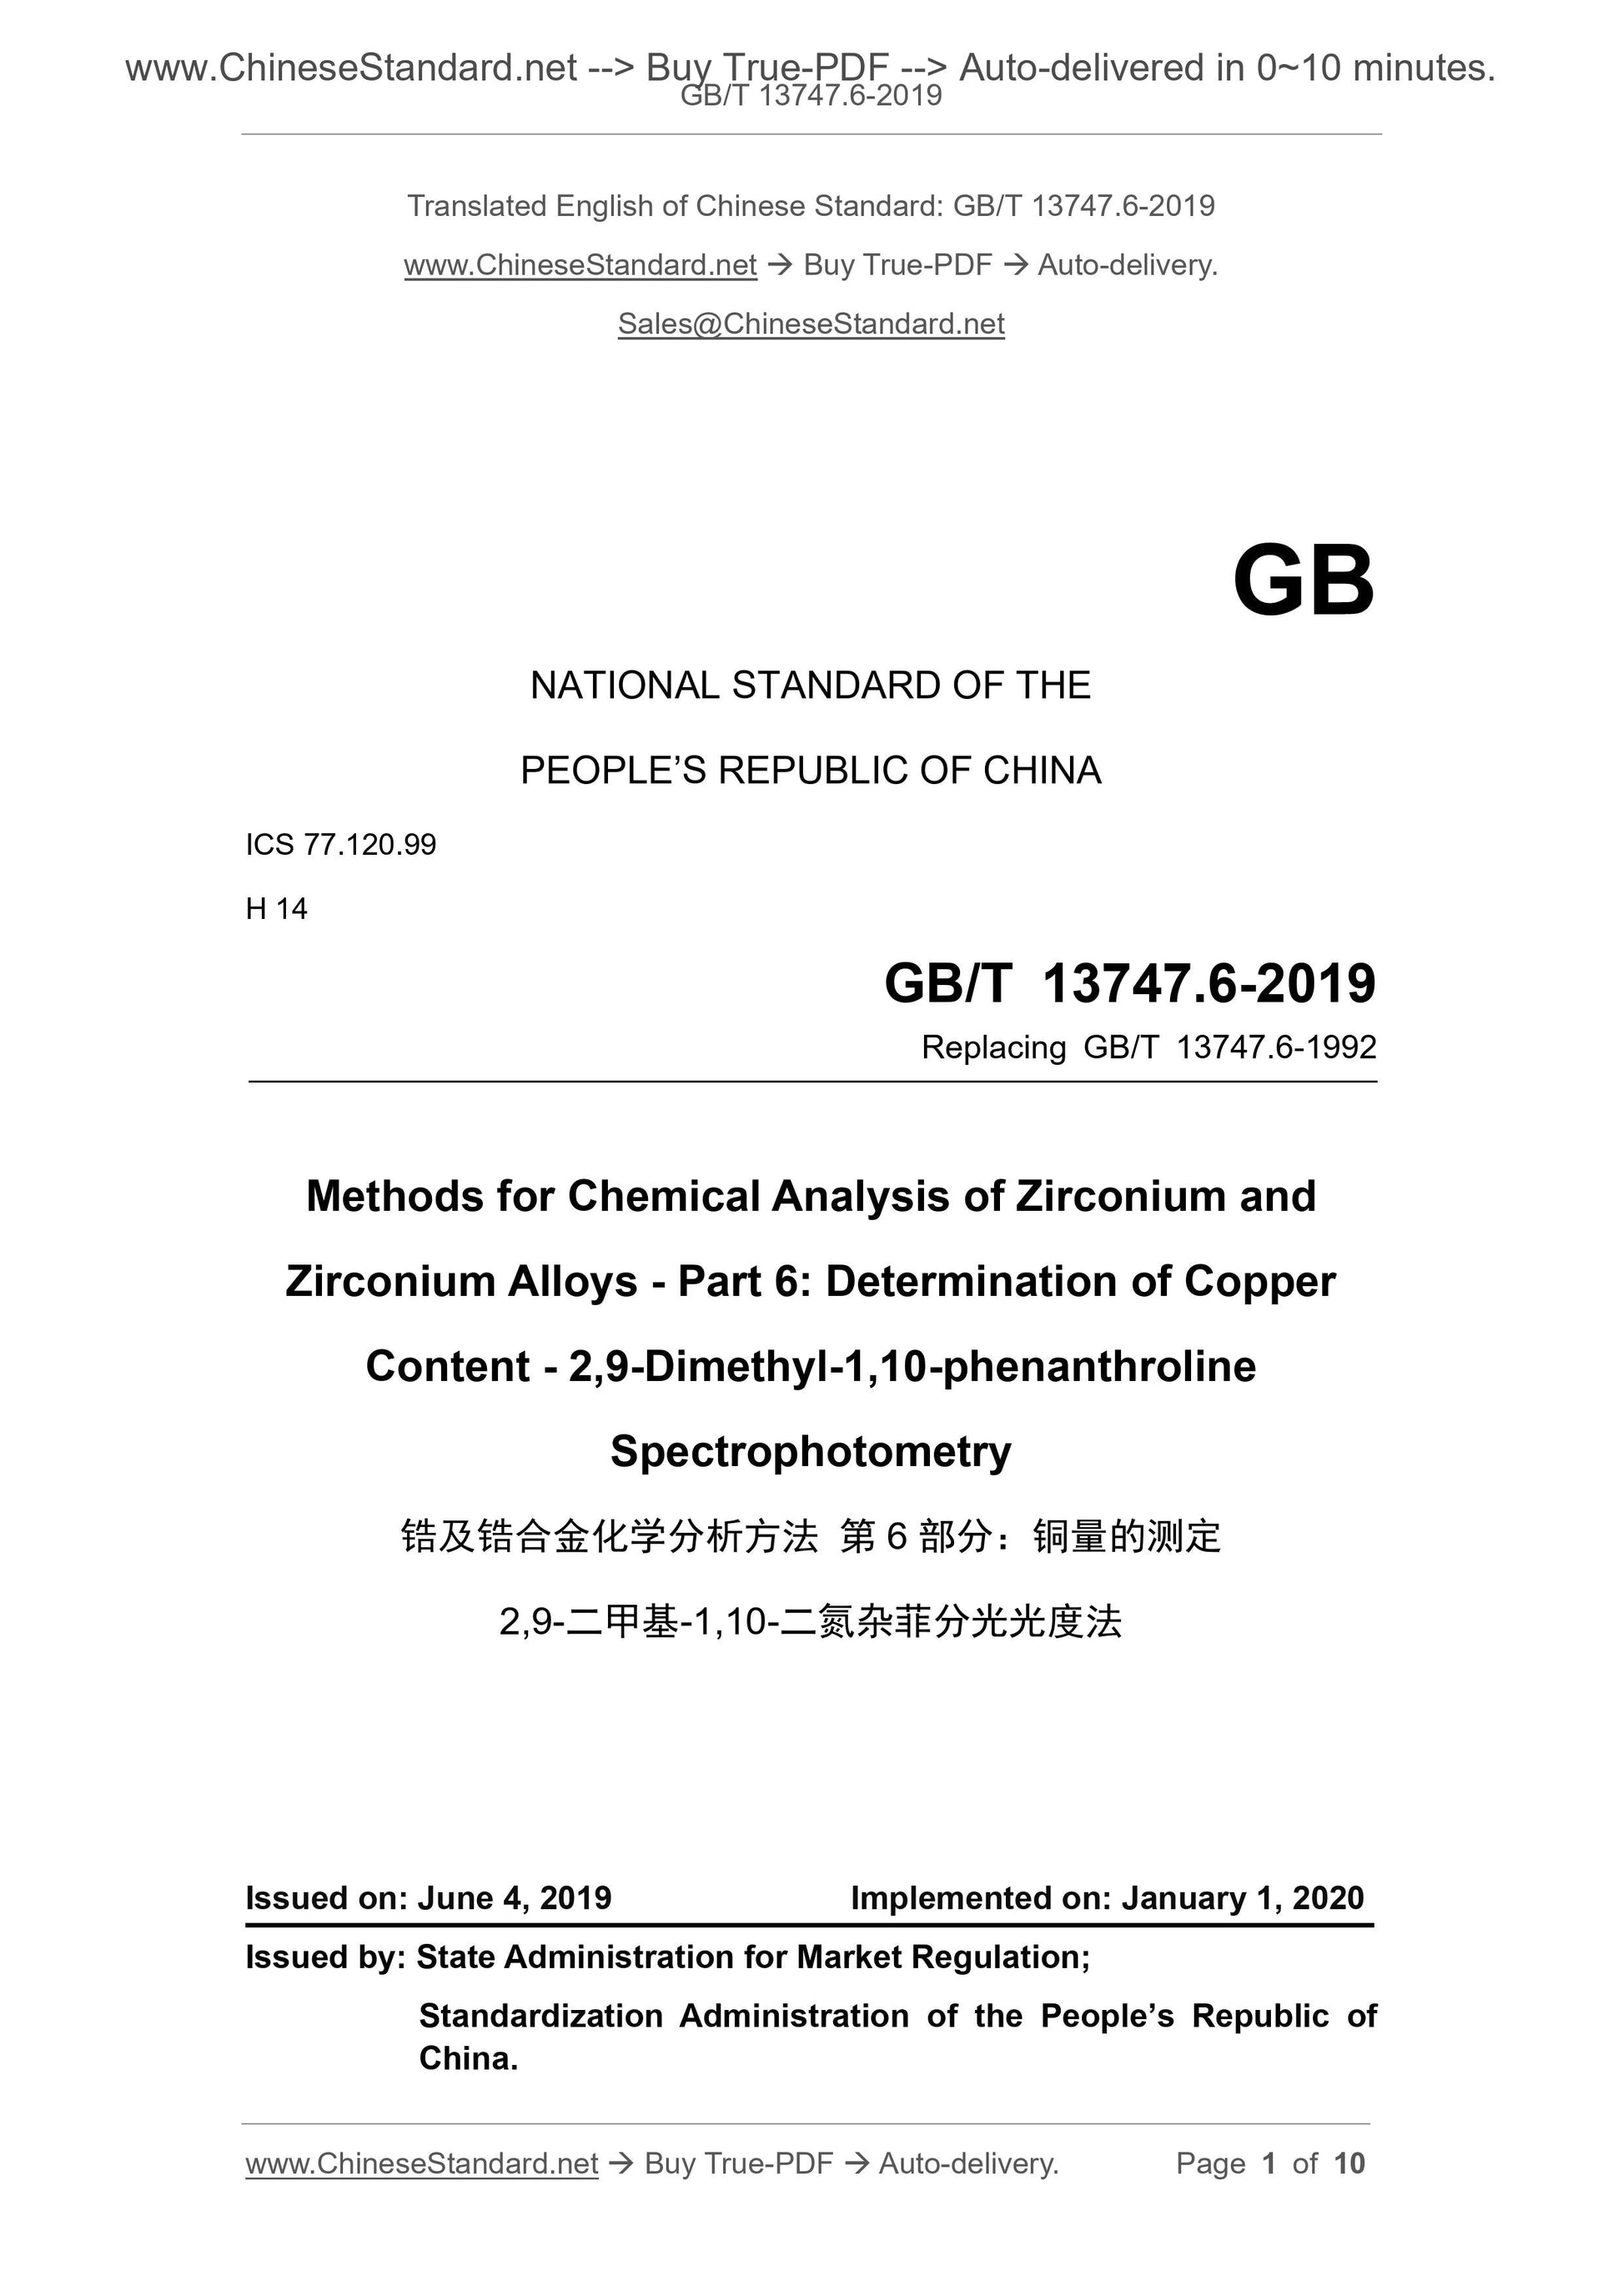 GB/T 13747.6-2019 Page 1